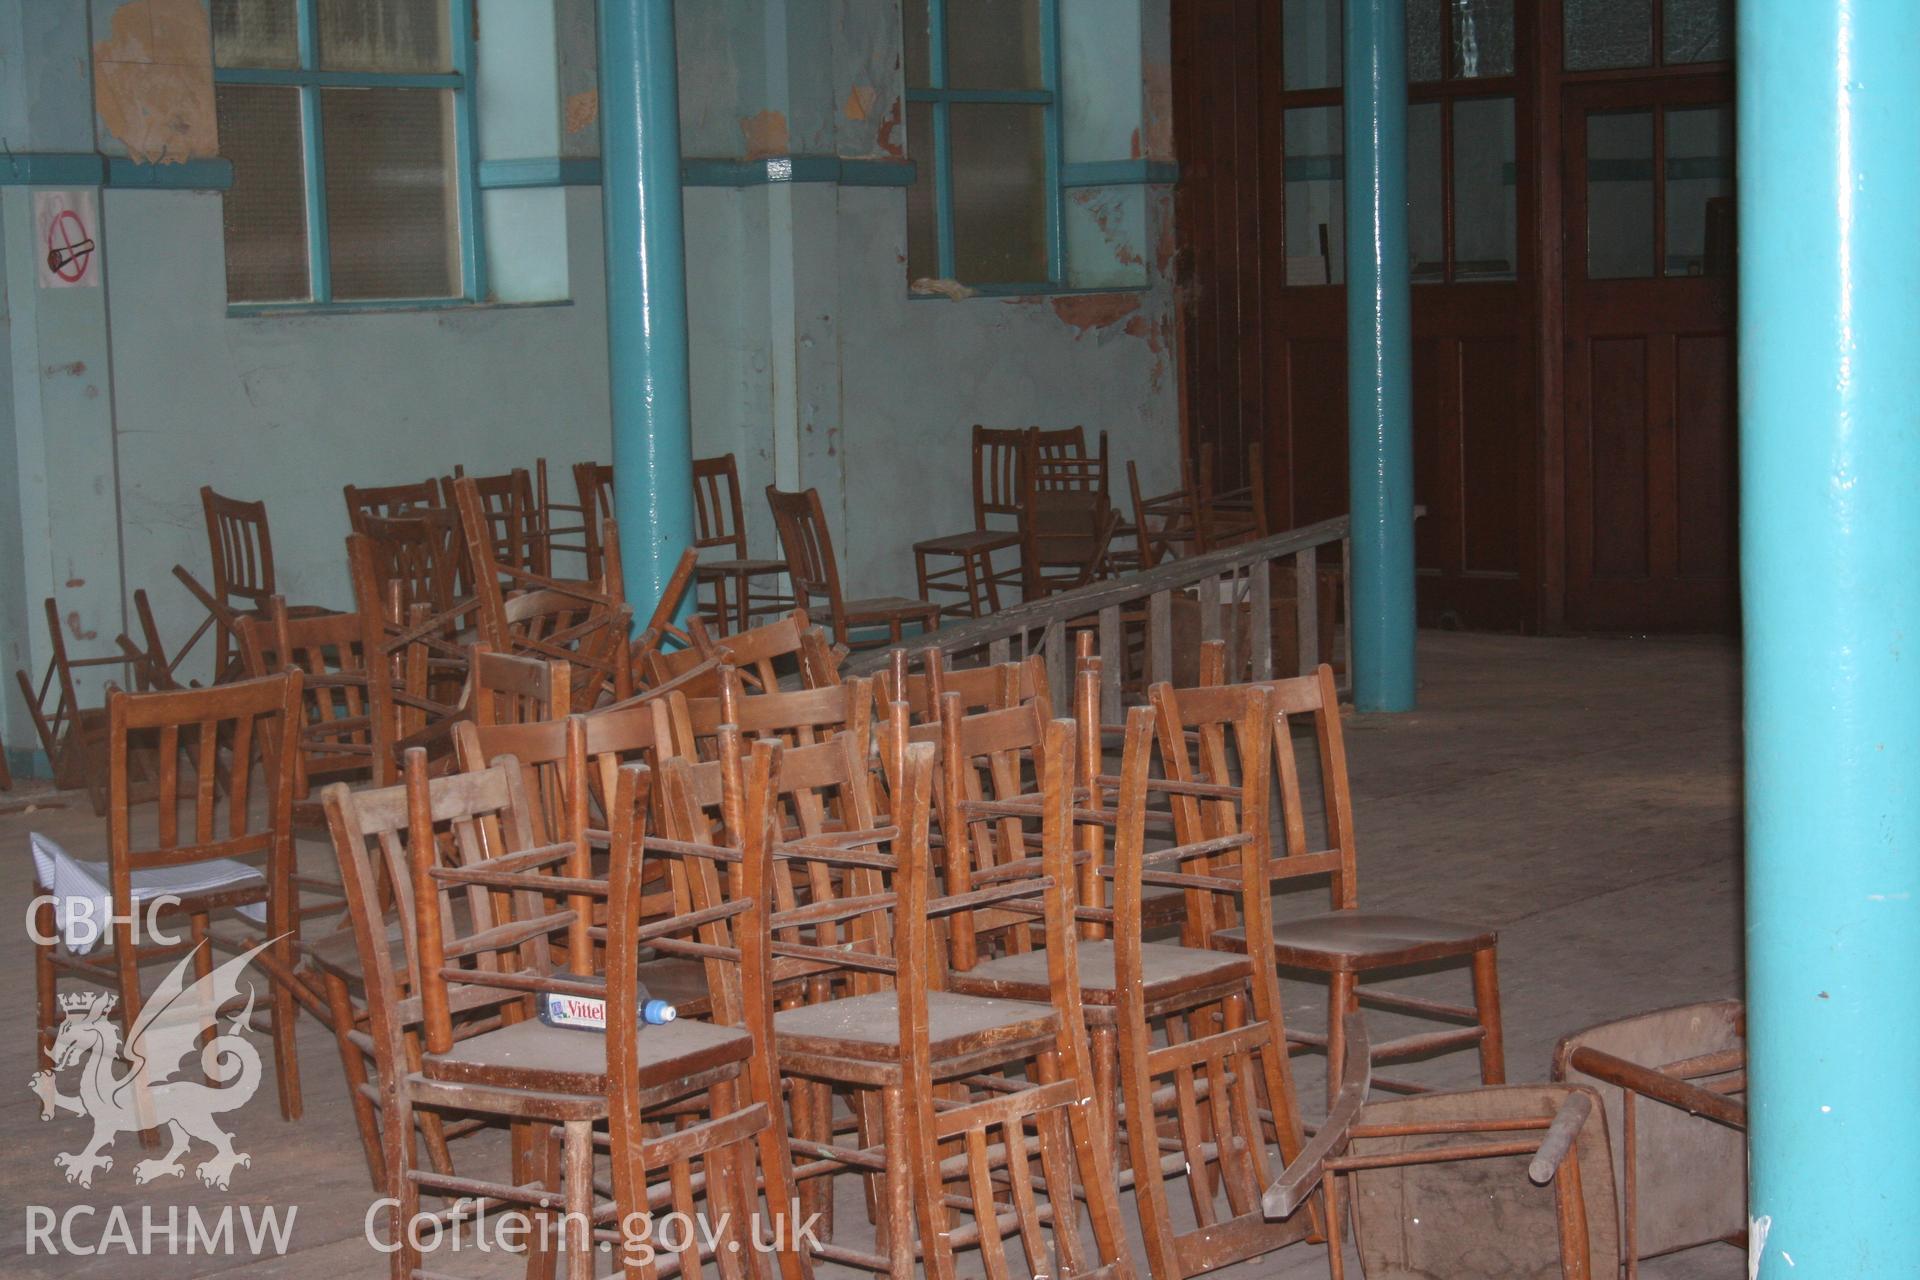 Hanbury Road baptist chapel, Bargoed, digital colour photograph showing interior - school room, received in the course of Emergency Recording case ref no RCS2/1/2247.